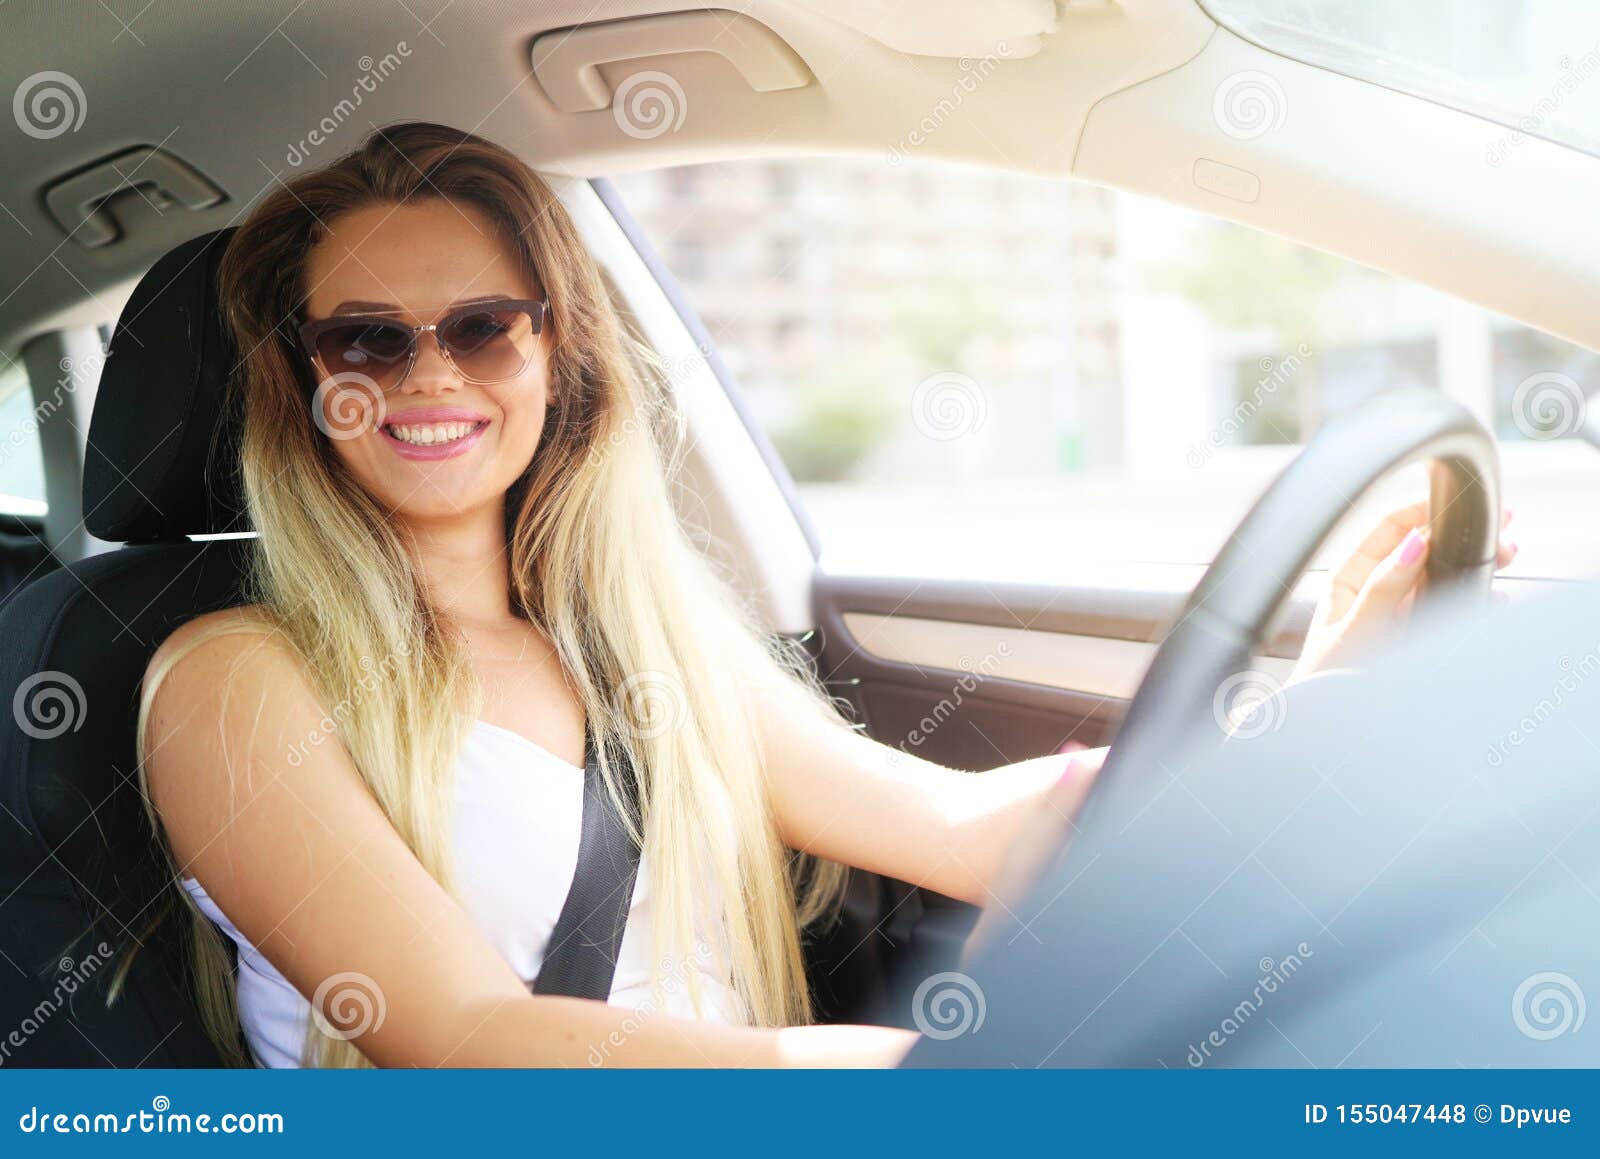 Young Blonde Woman Smiling While Driving A Car Rent A Car In Vacation